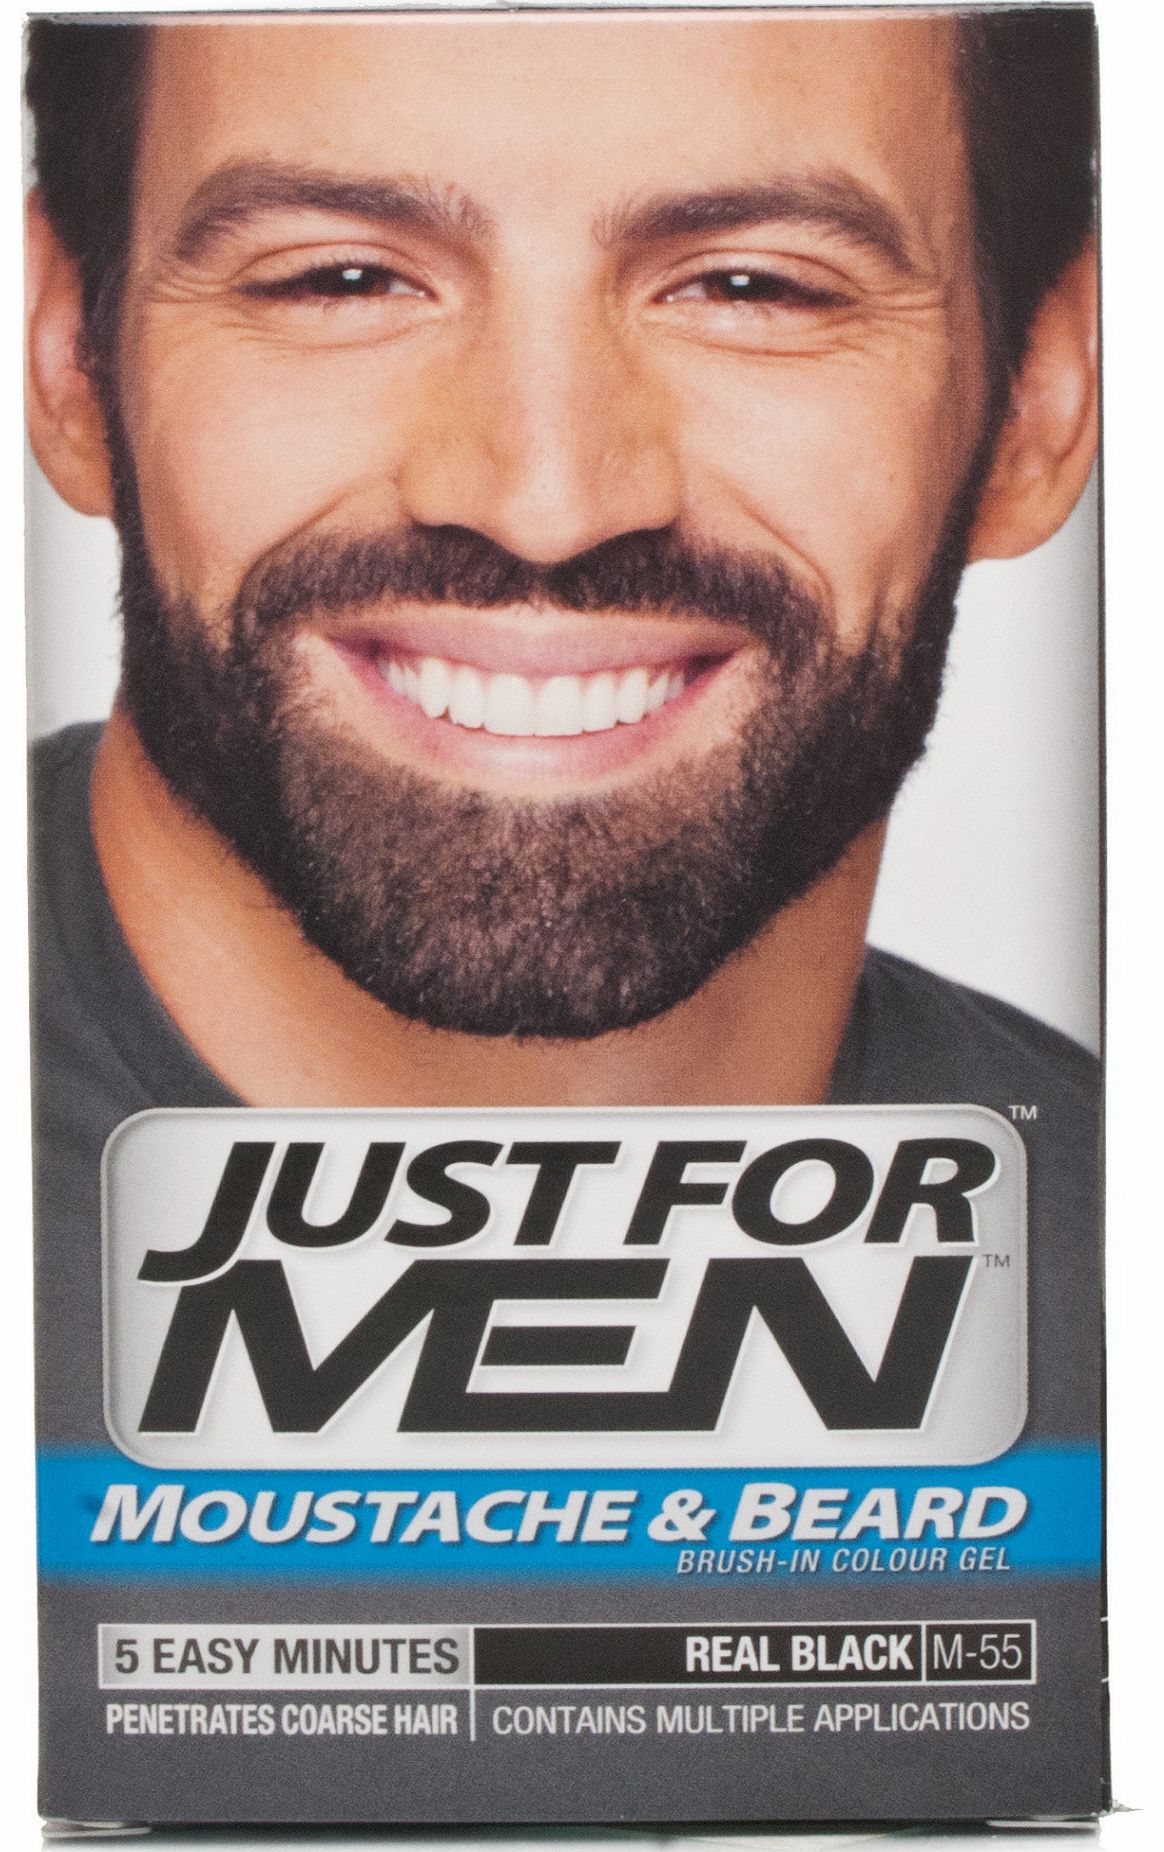 Just For Men Brush-In Facial Hair Colour - Real